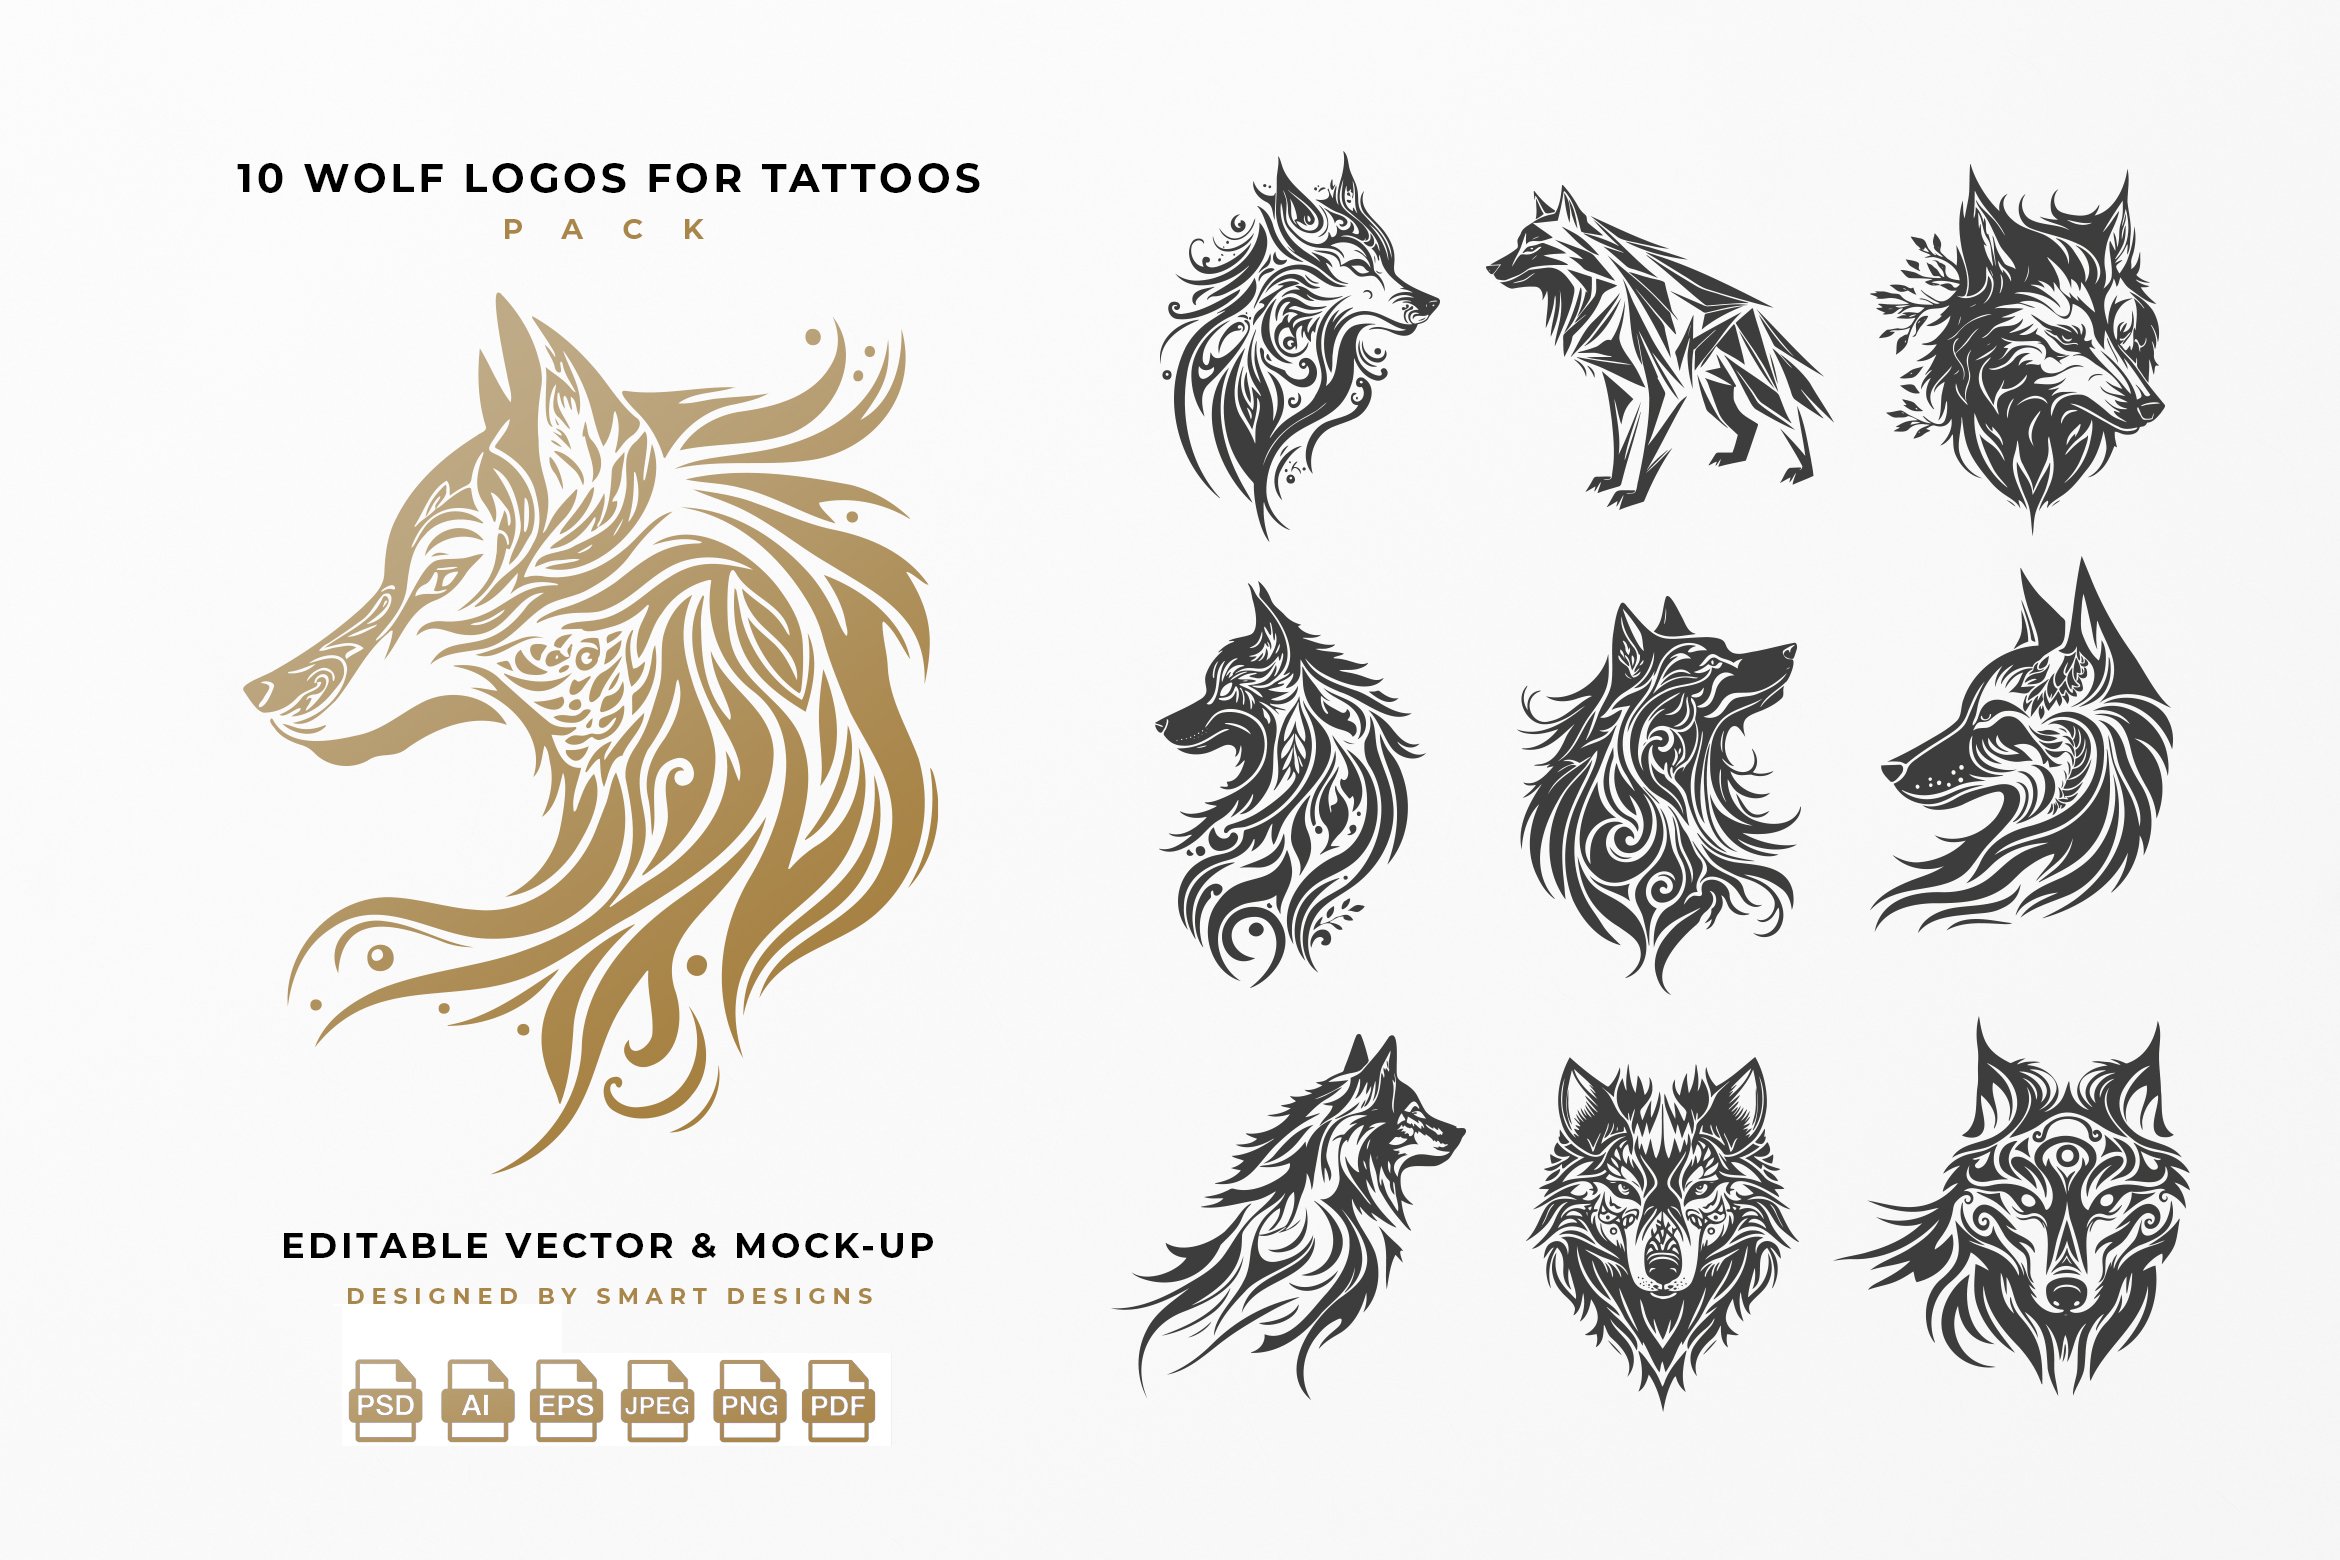 wolf logos for tattoos pack x10 73